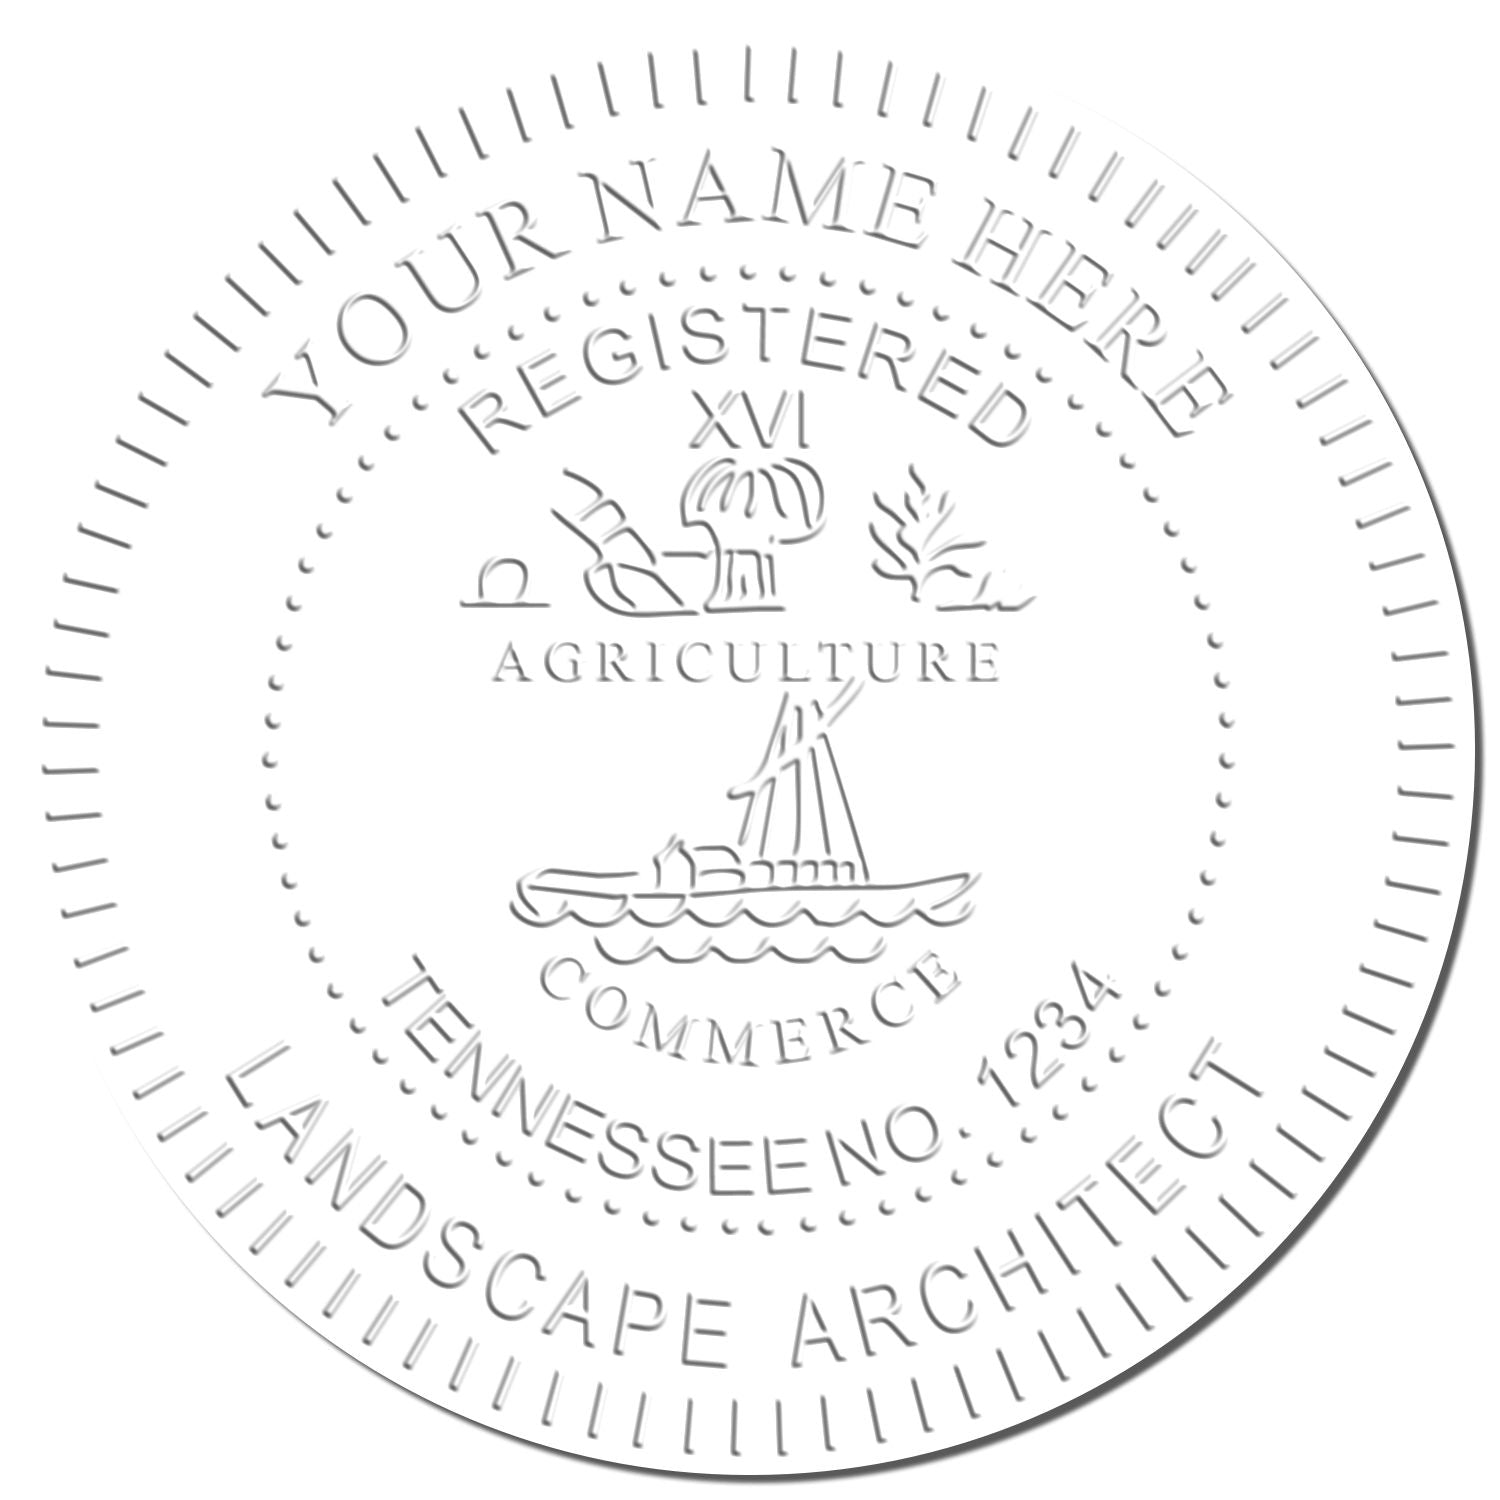 This paper is stamped with a sample imprint of the Heavy Duty Tennessee Landscape Architect Cast Iron Embosser, signifying its quality and reliability.